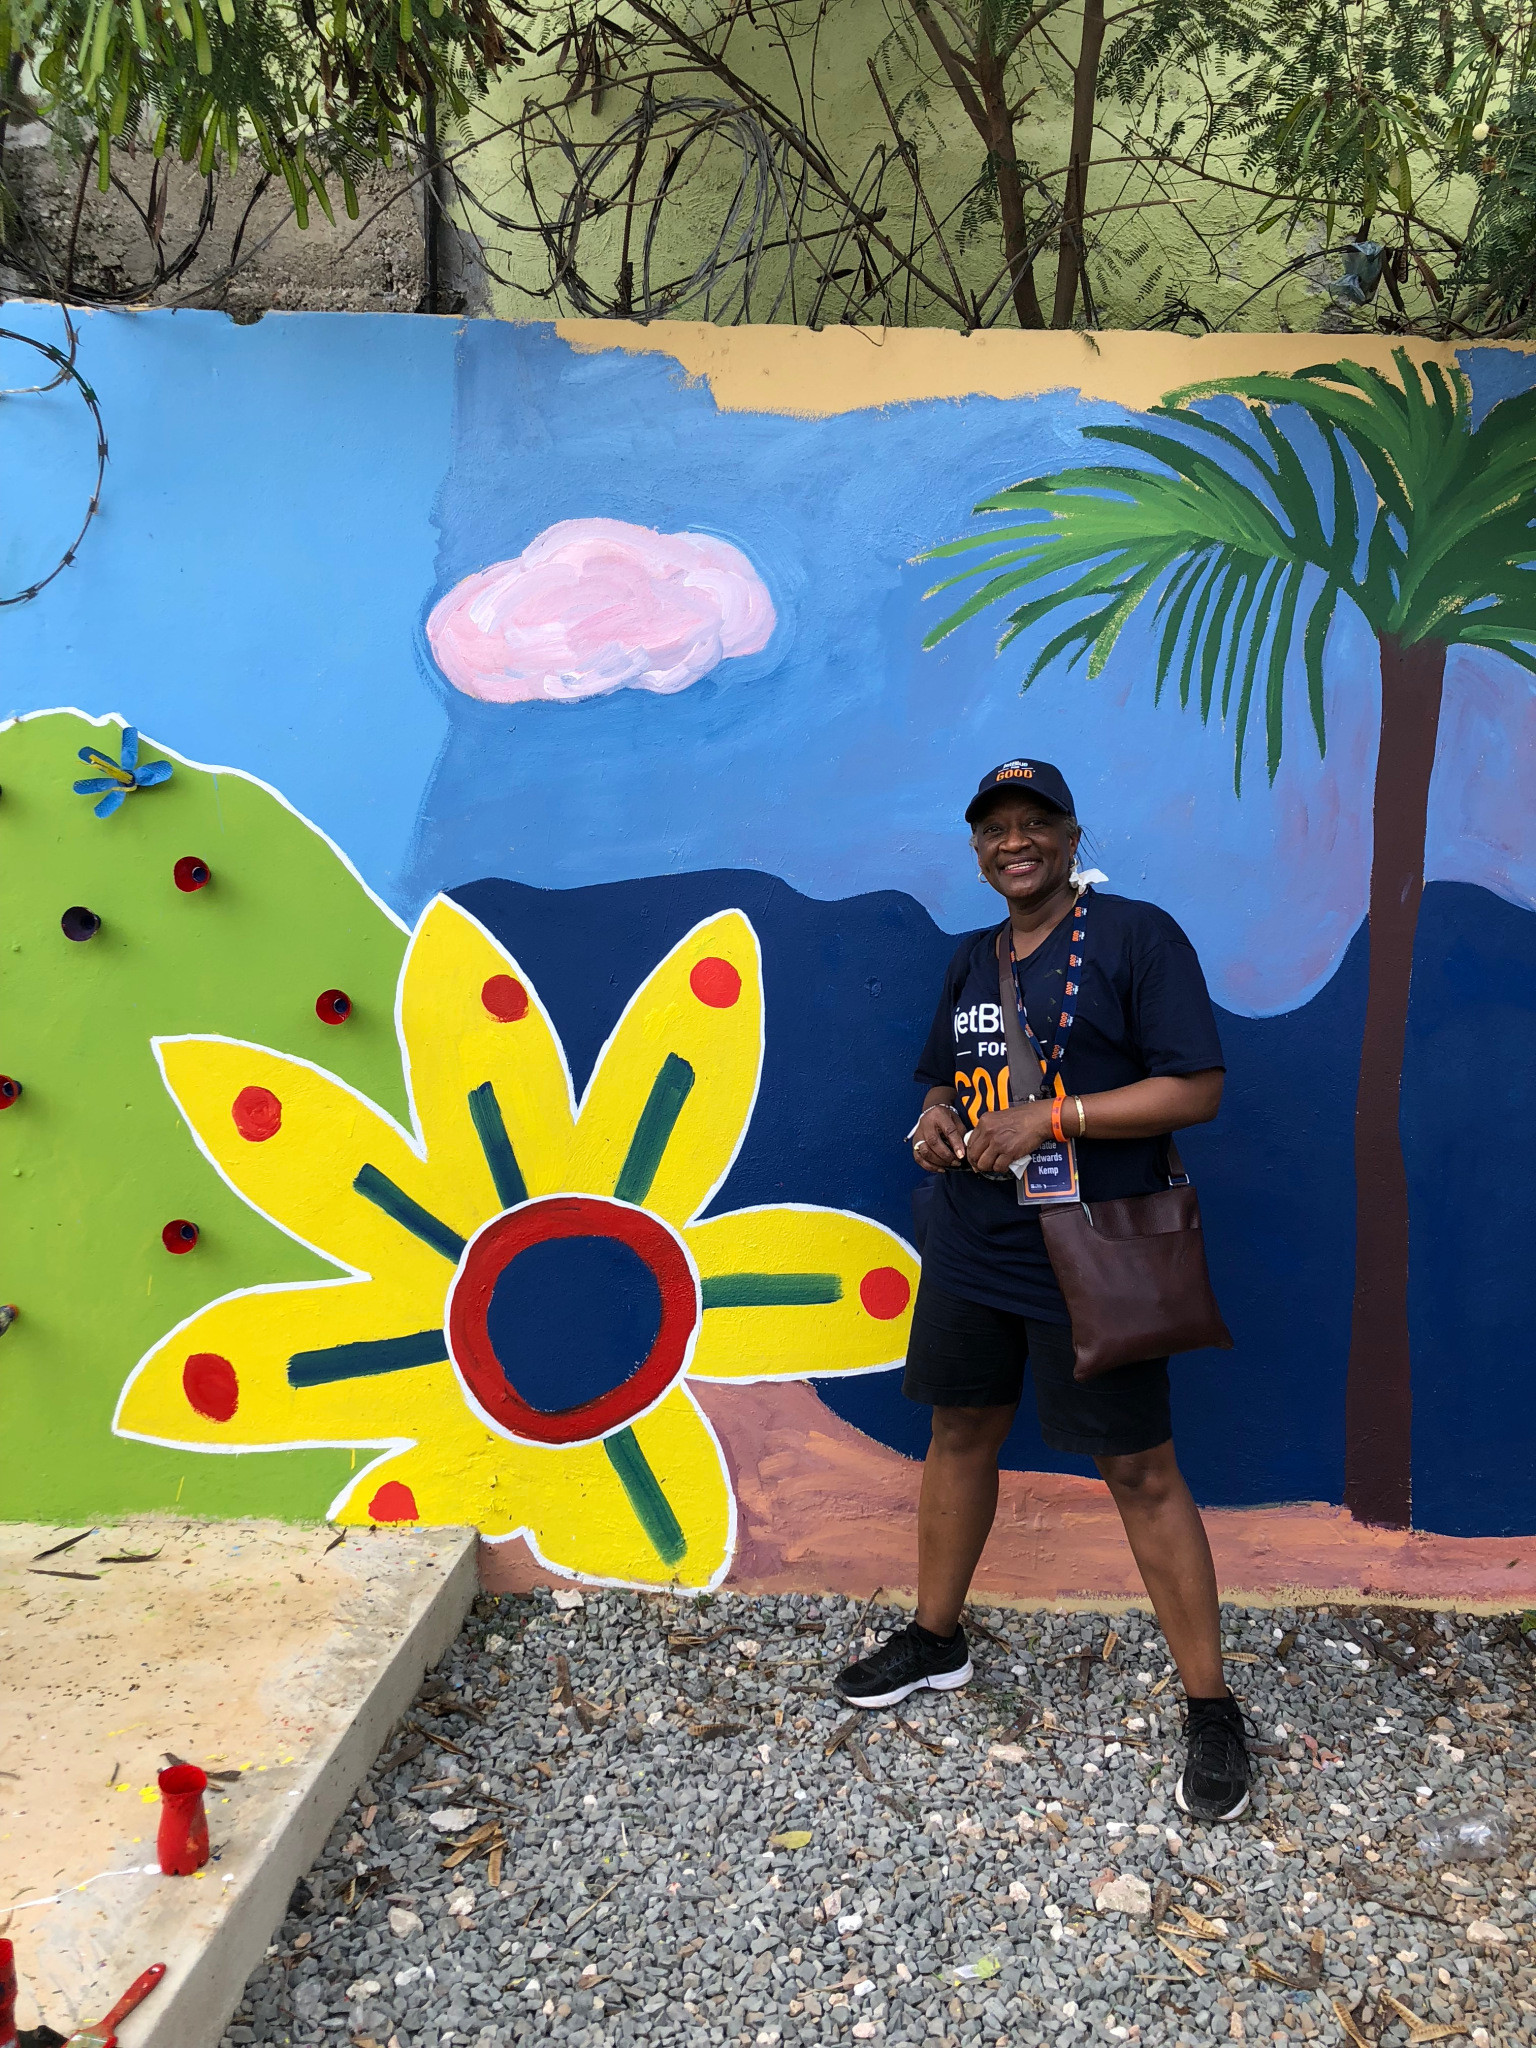 Mattie Kemp, associate head of school at Pennfield School, poses next to a mural that volunteers help create at a school in the Dominican Republic.